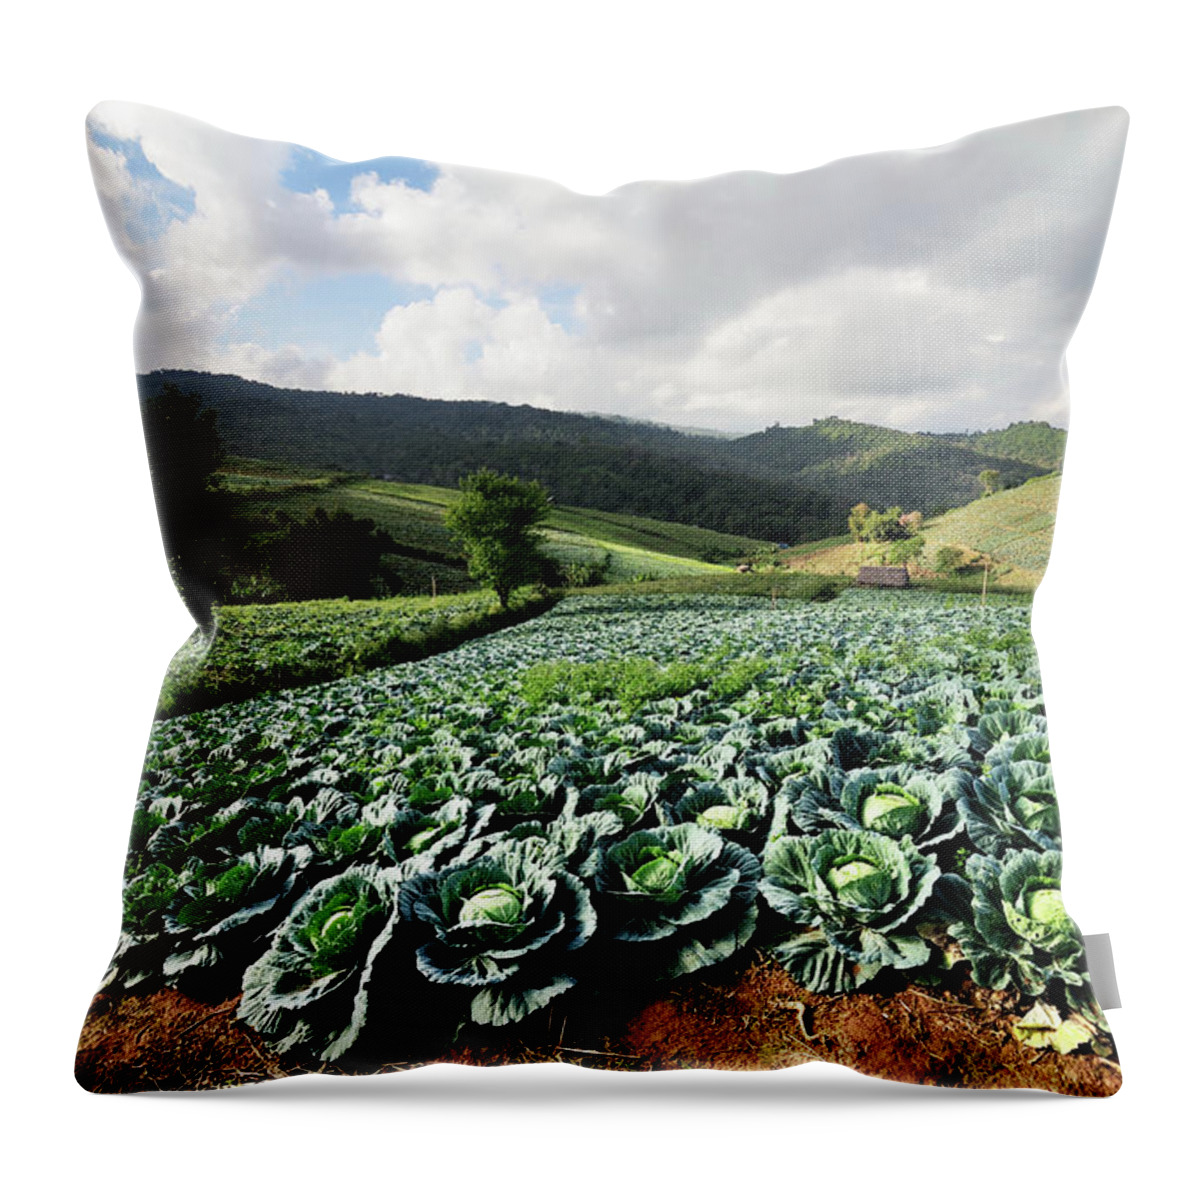 Scenics Throw Pillow featuring the photograph Cabbage by Pailoolom